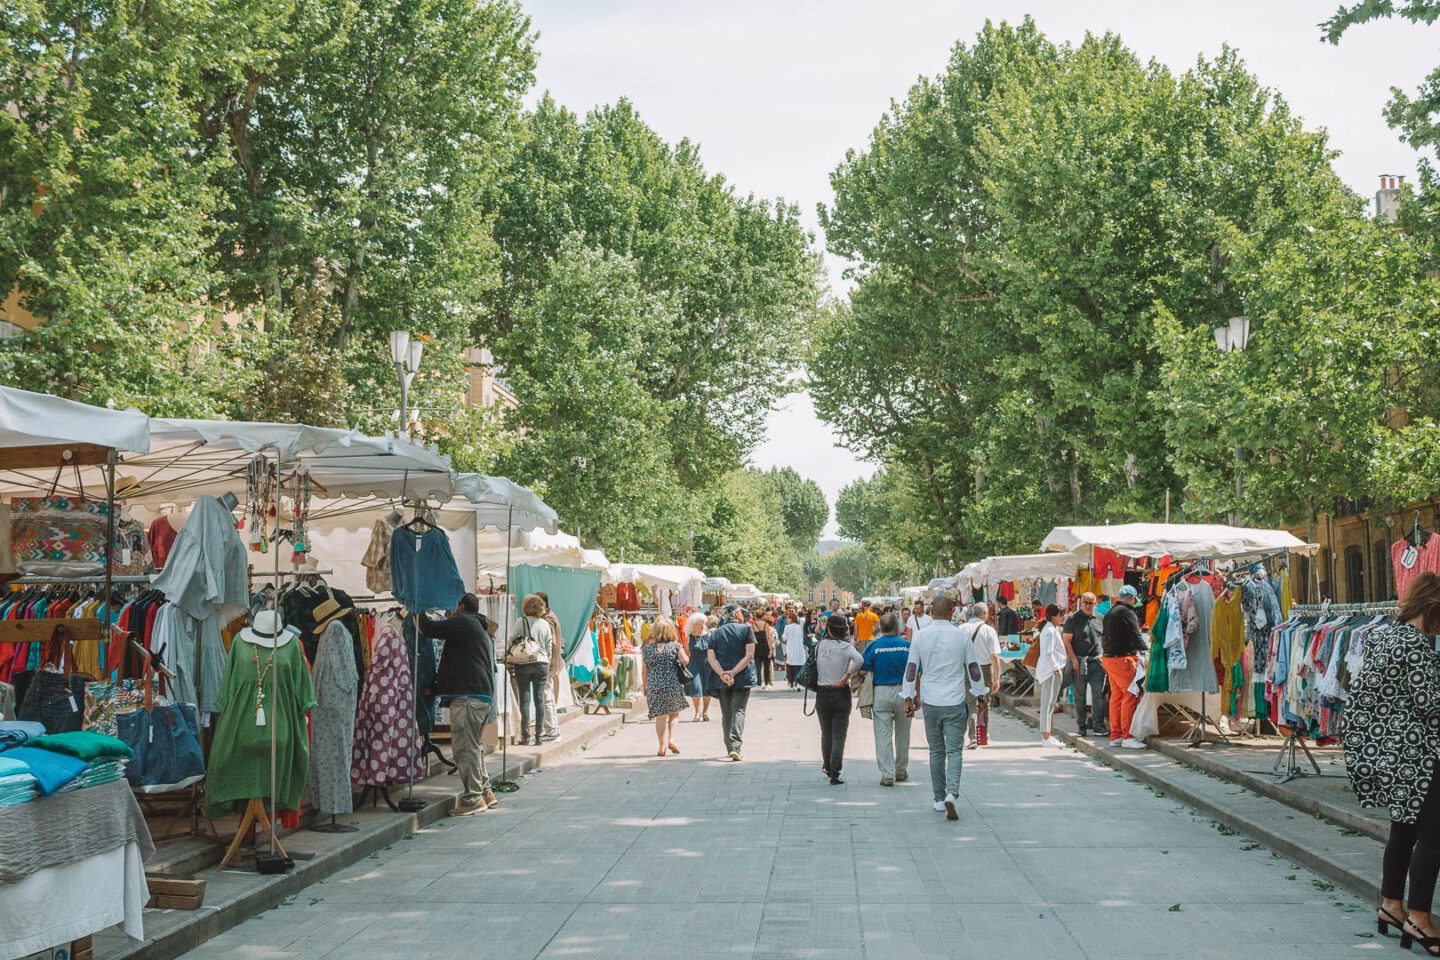 Visitors pass through the outdoor market under the trees of Aix-en-Provence, France